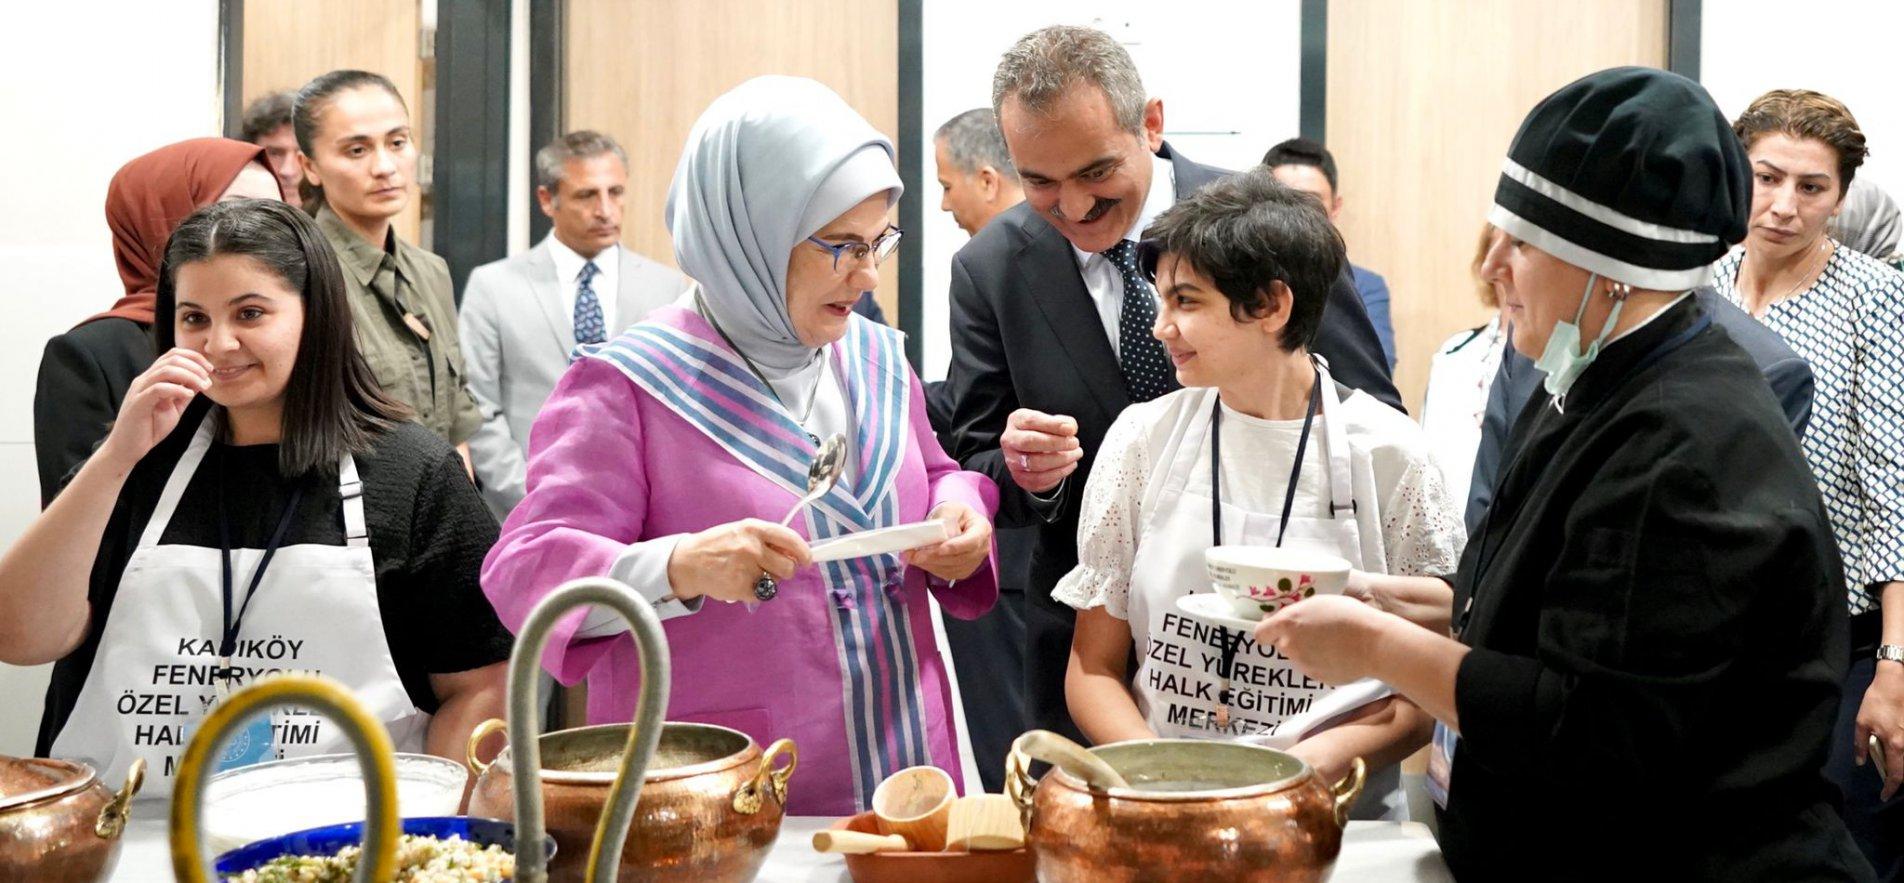 EMİNE ERDOĞAN AND MINISTER ÖZER INAUGURATED TÜRKİYE'S FIRST PUBLIC EDUCATION CENTER FOR DISABLED ADULTS